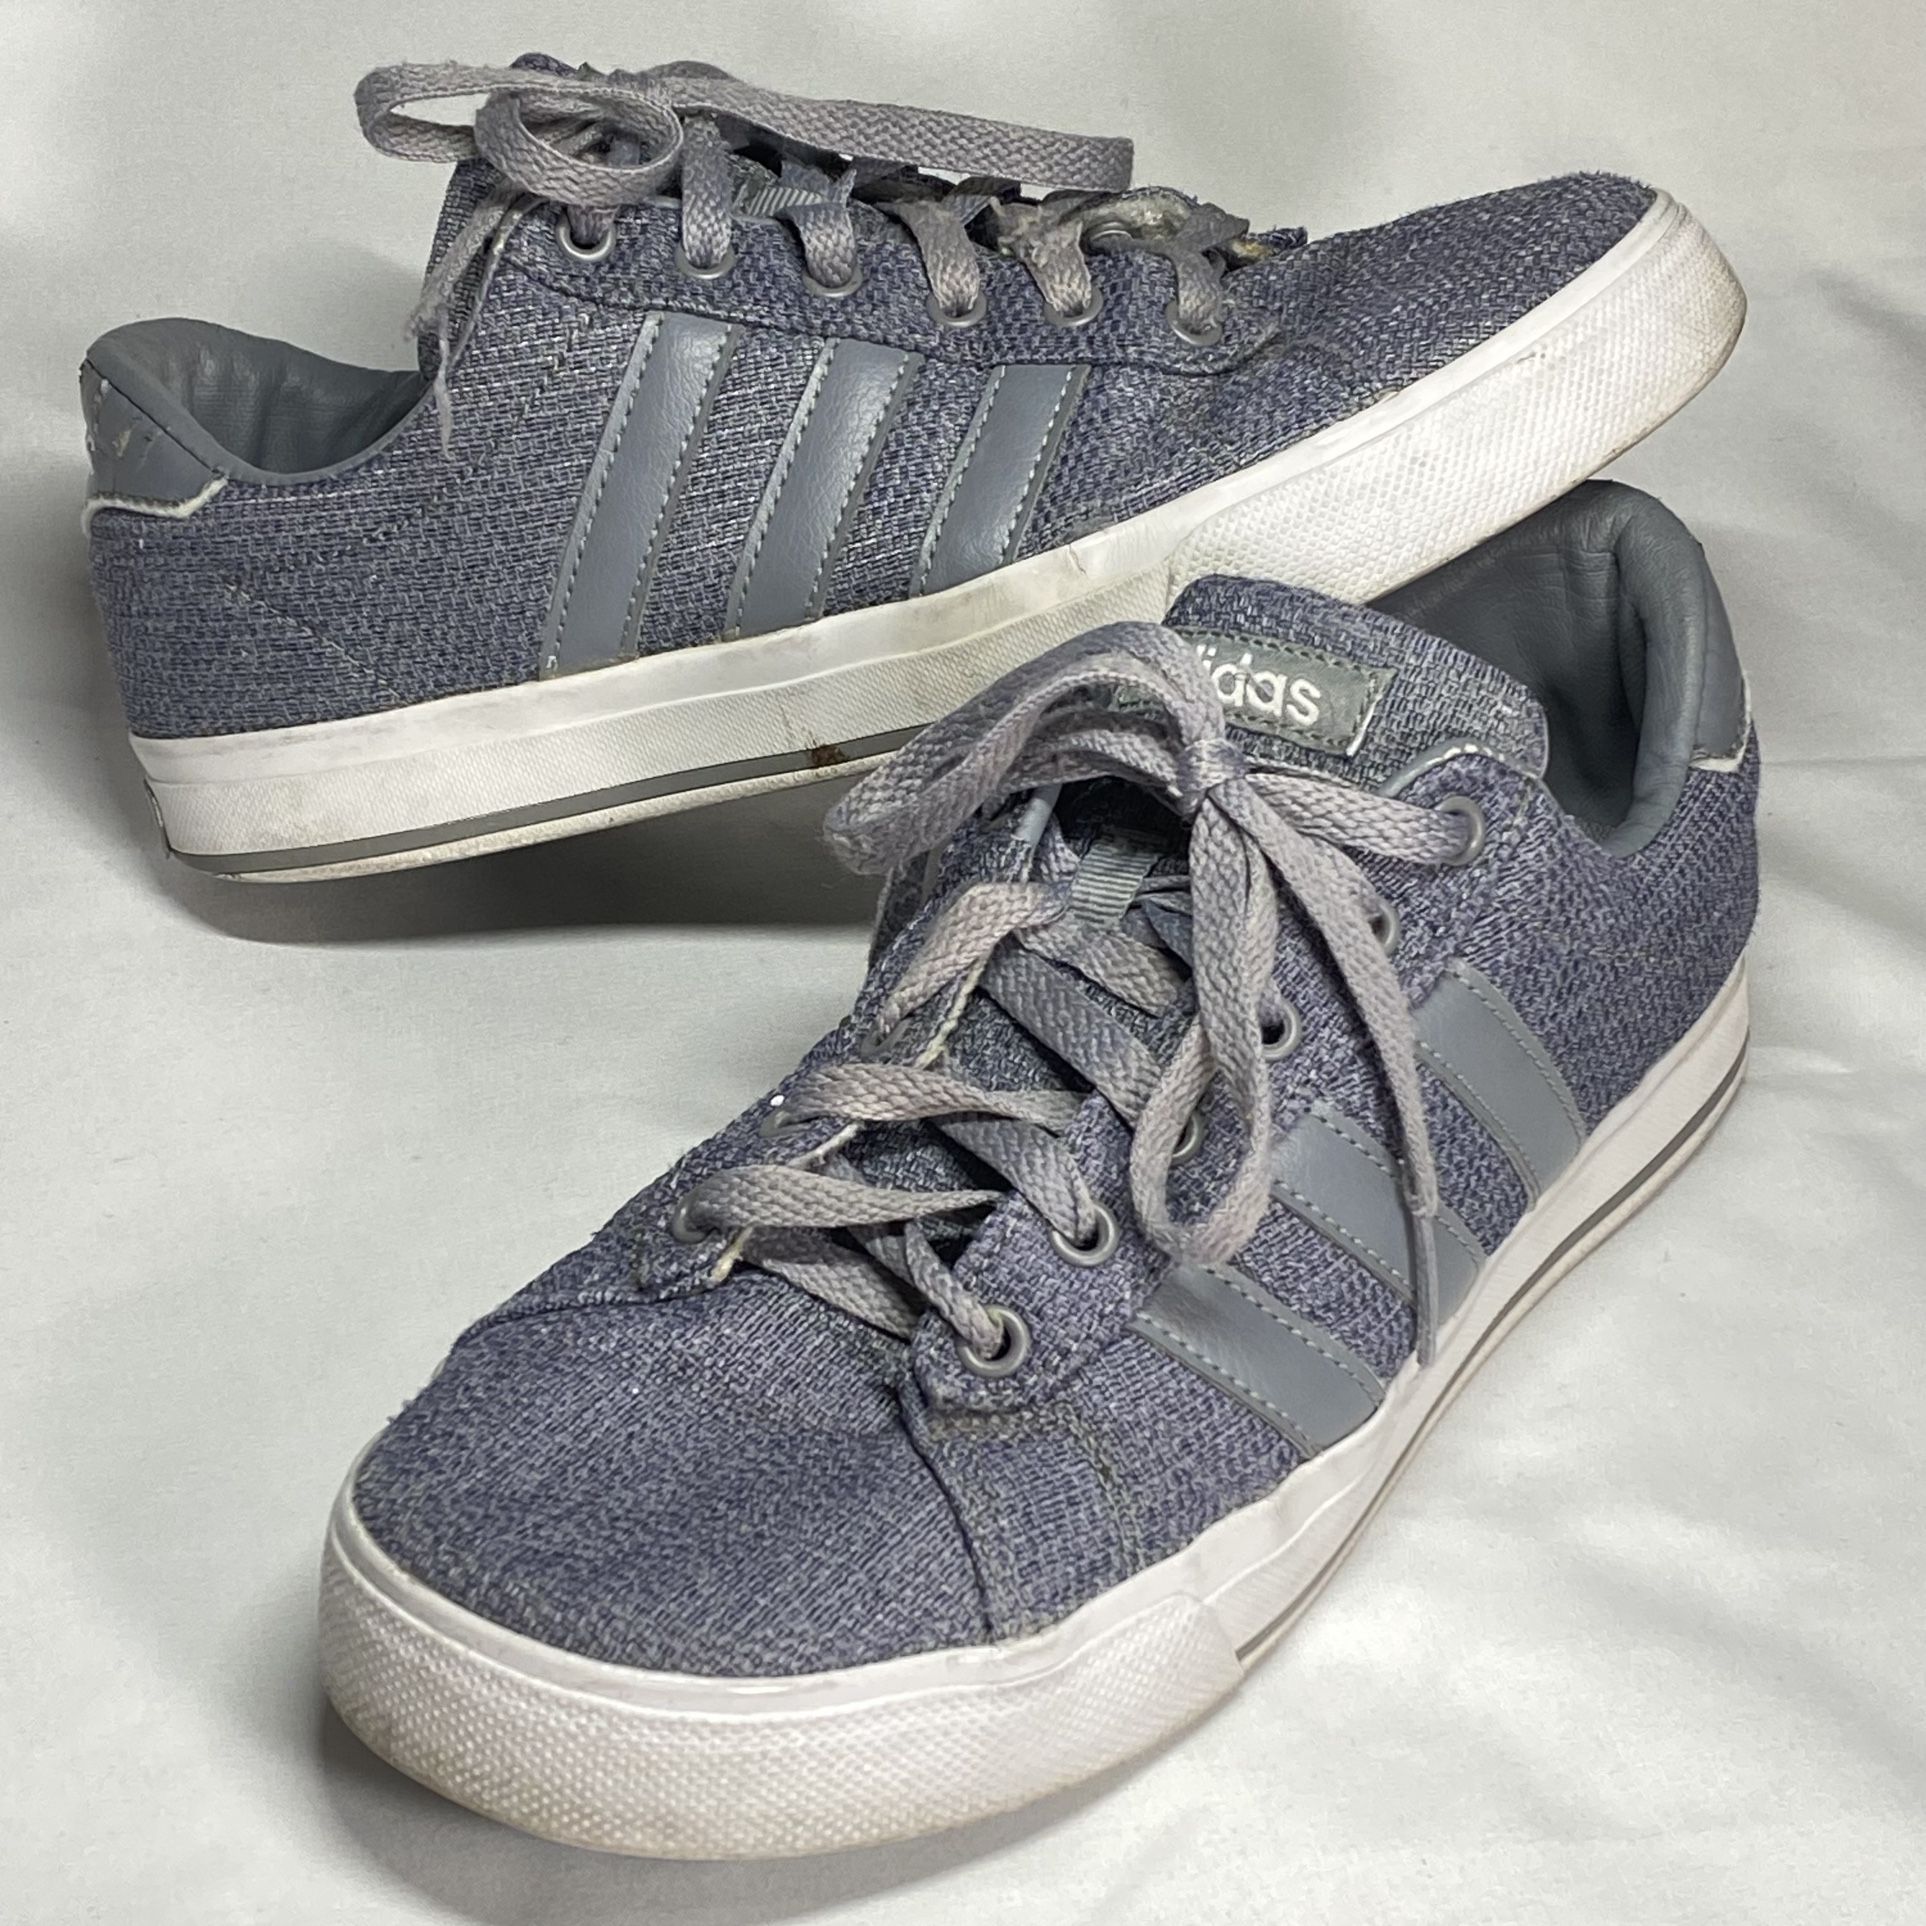 Adidas Mens Size 6.5 Neo Cloudfoam AW4568 Gray Casual Shoes Sneakers Used